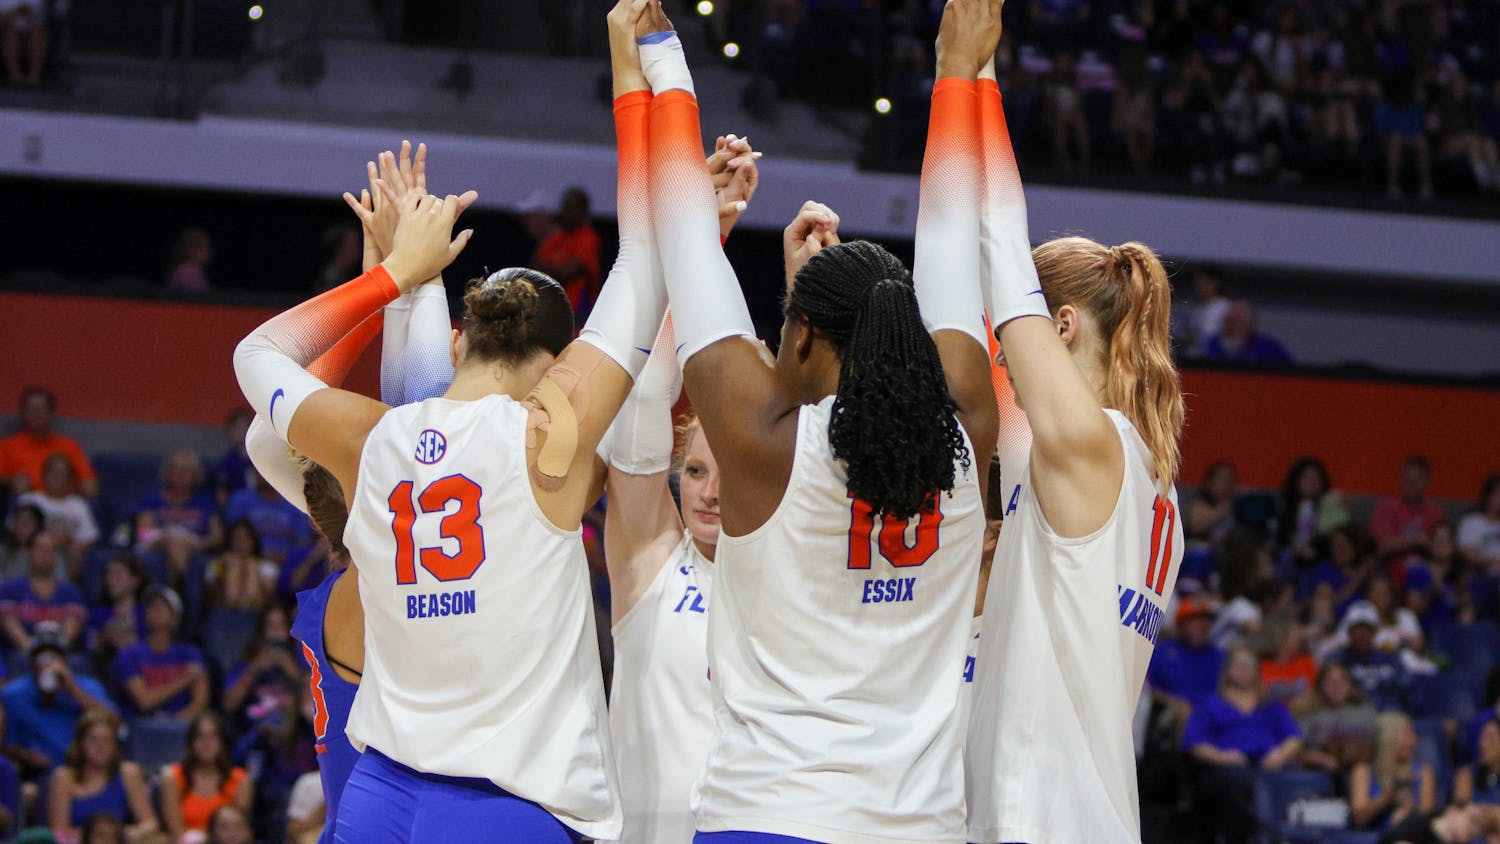 The Florida volleyball team celebrates a point during its game with the LSU Tigers Saturday, Oct. 8, 2022.